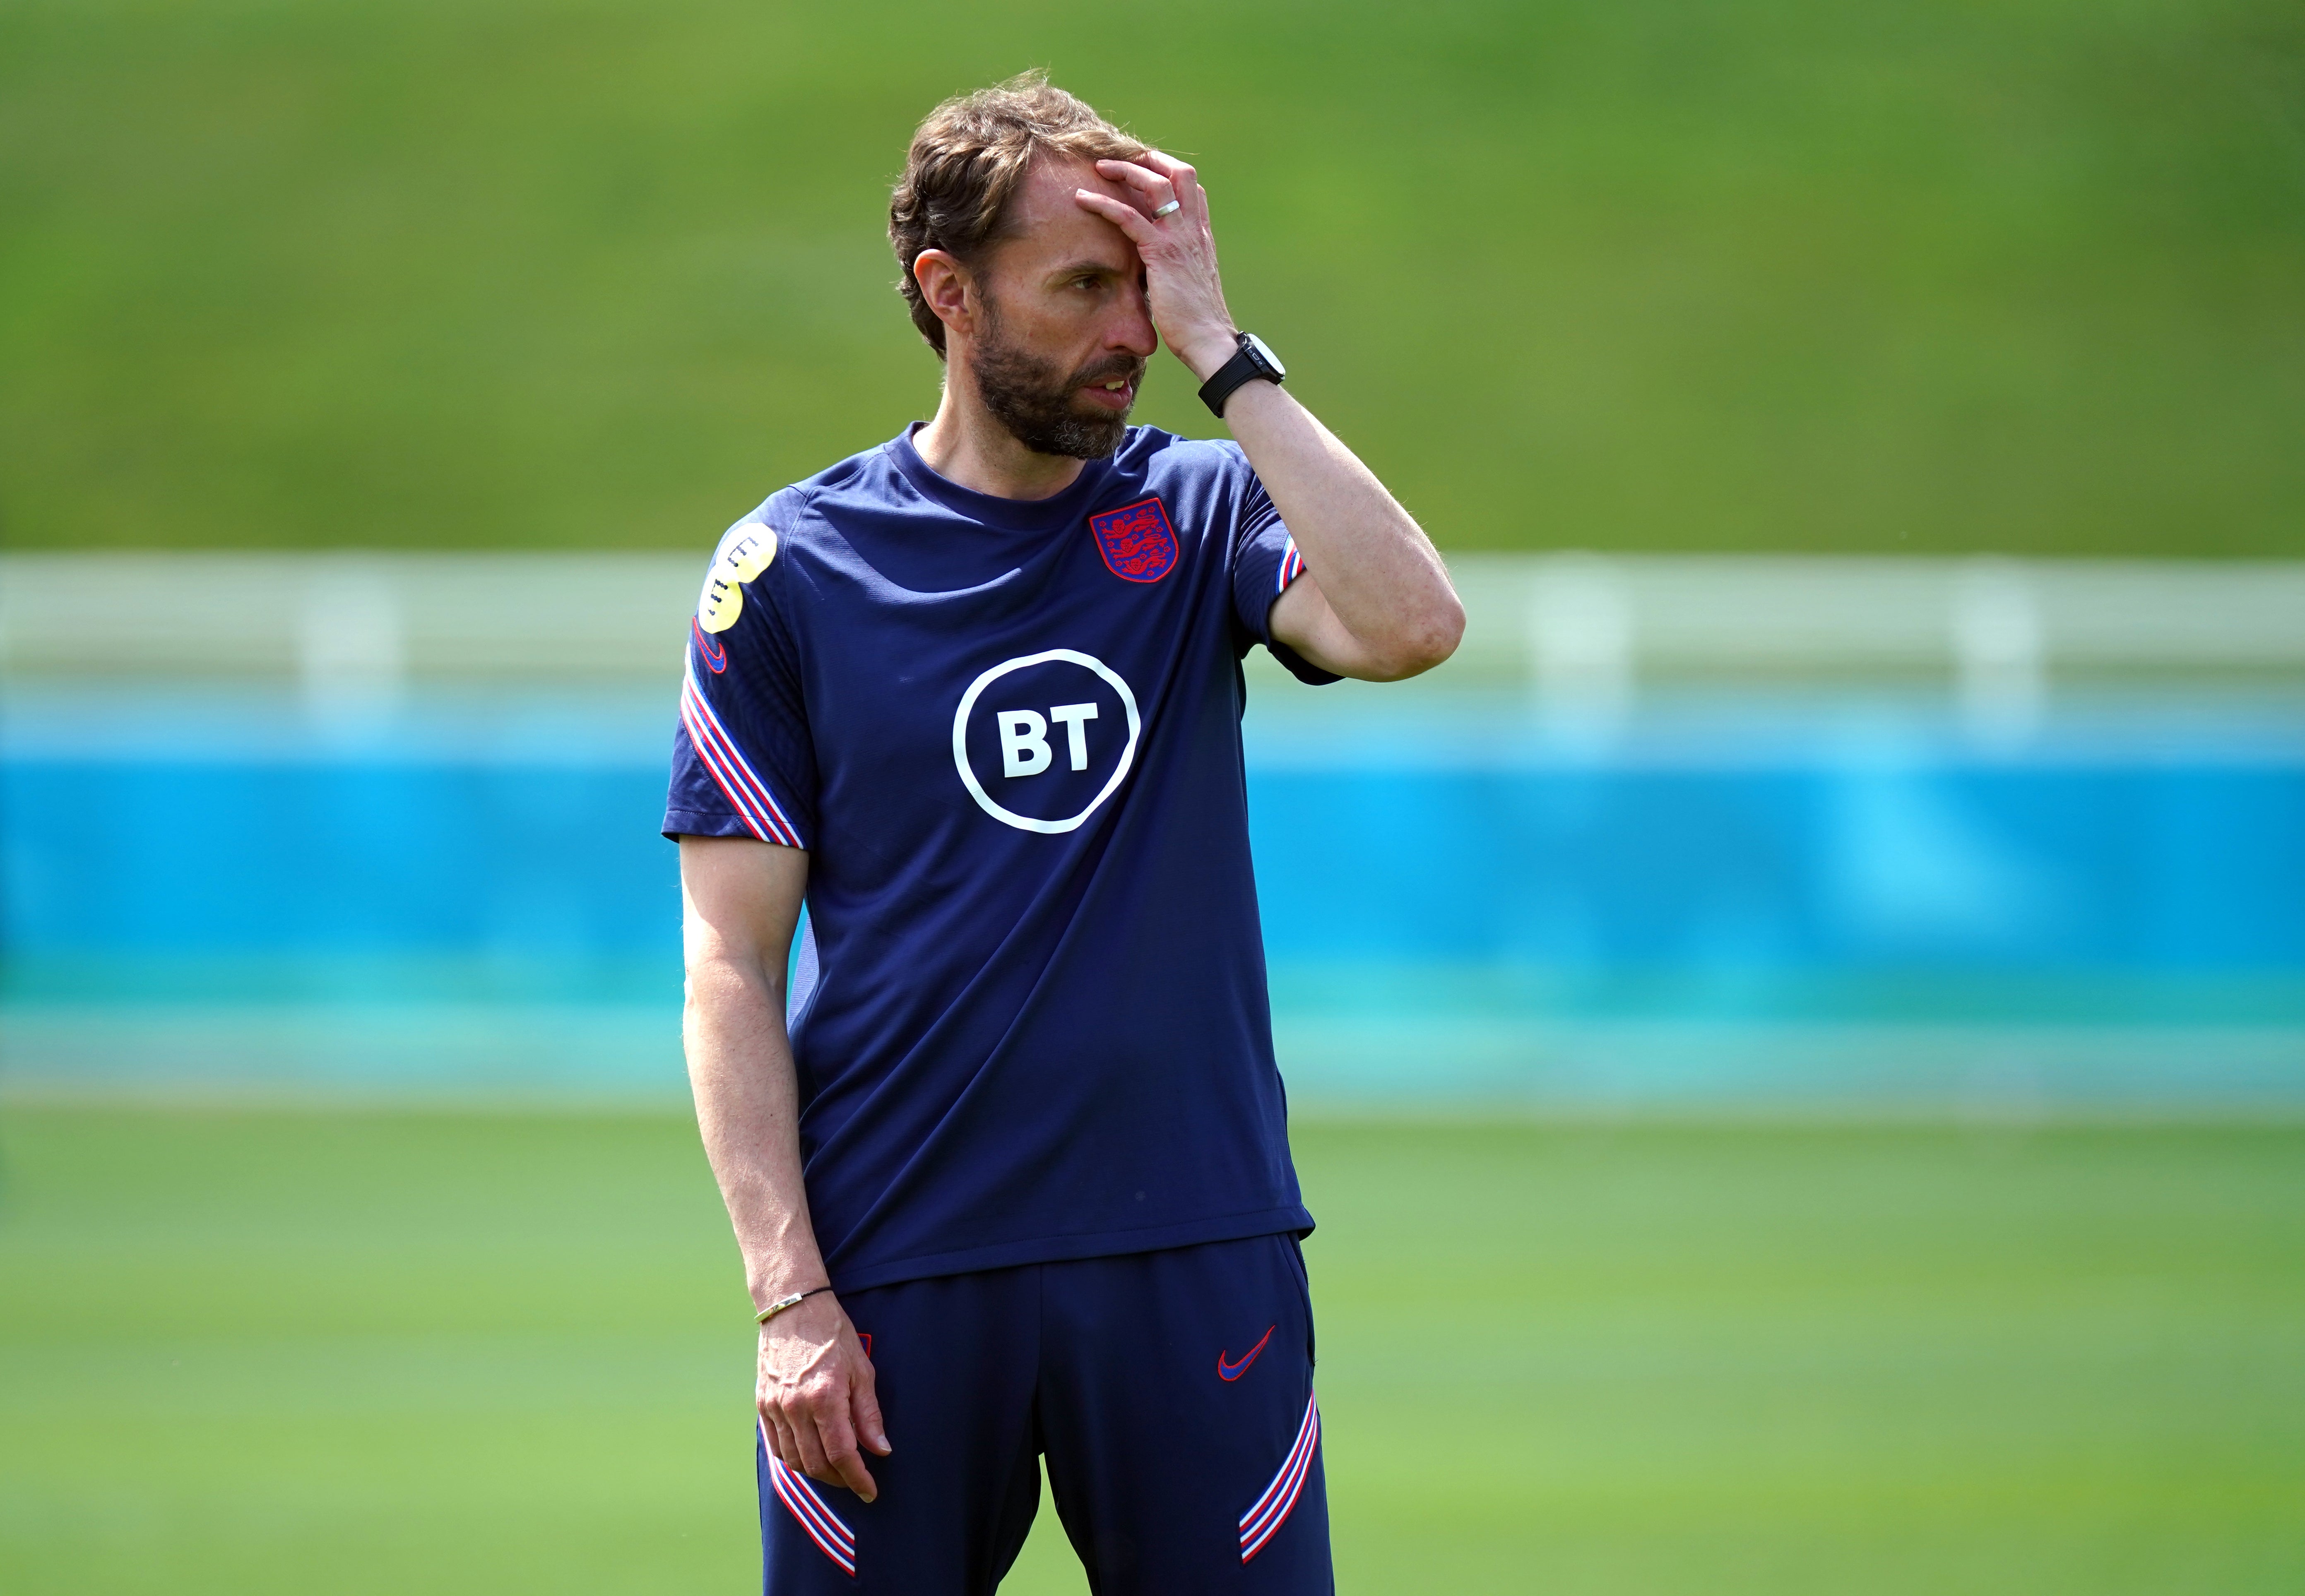 Southgate has decisions to make